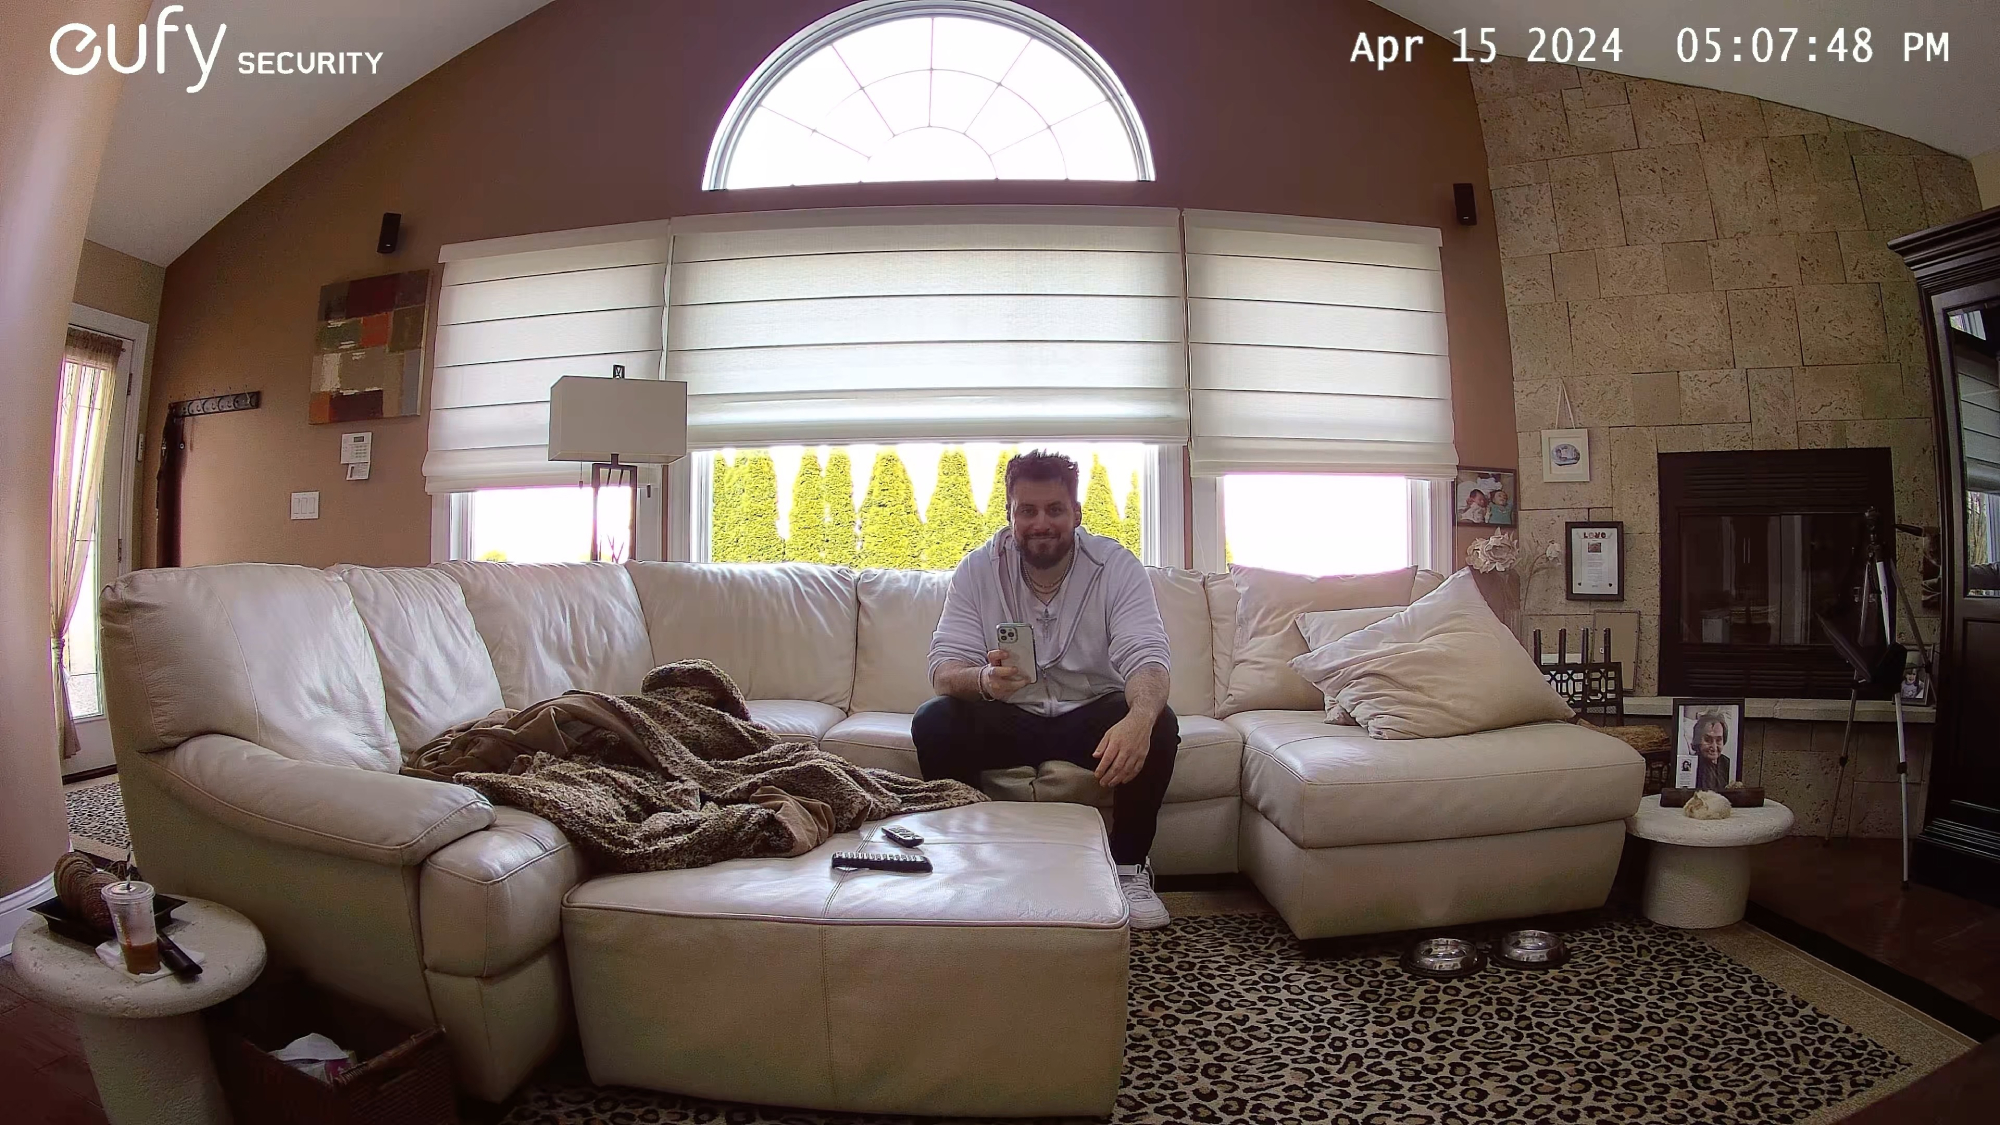 Eufy S350 captures man sitting on couch